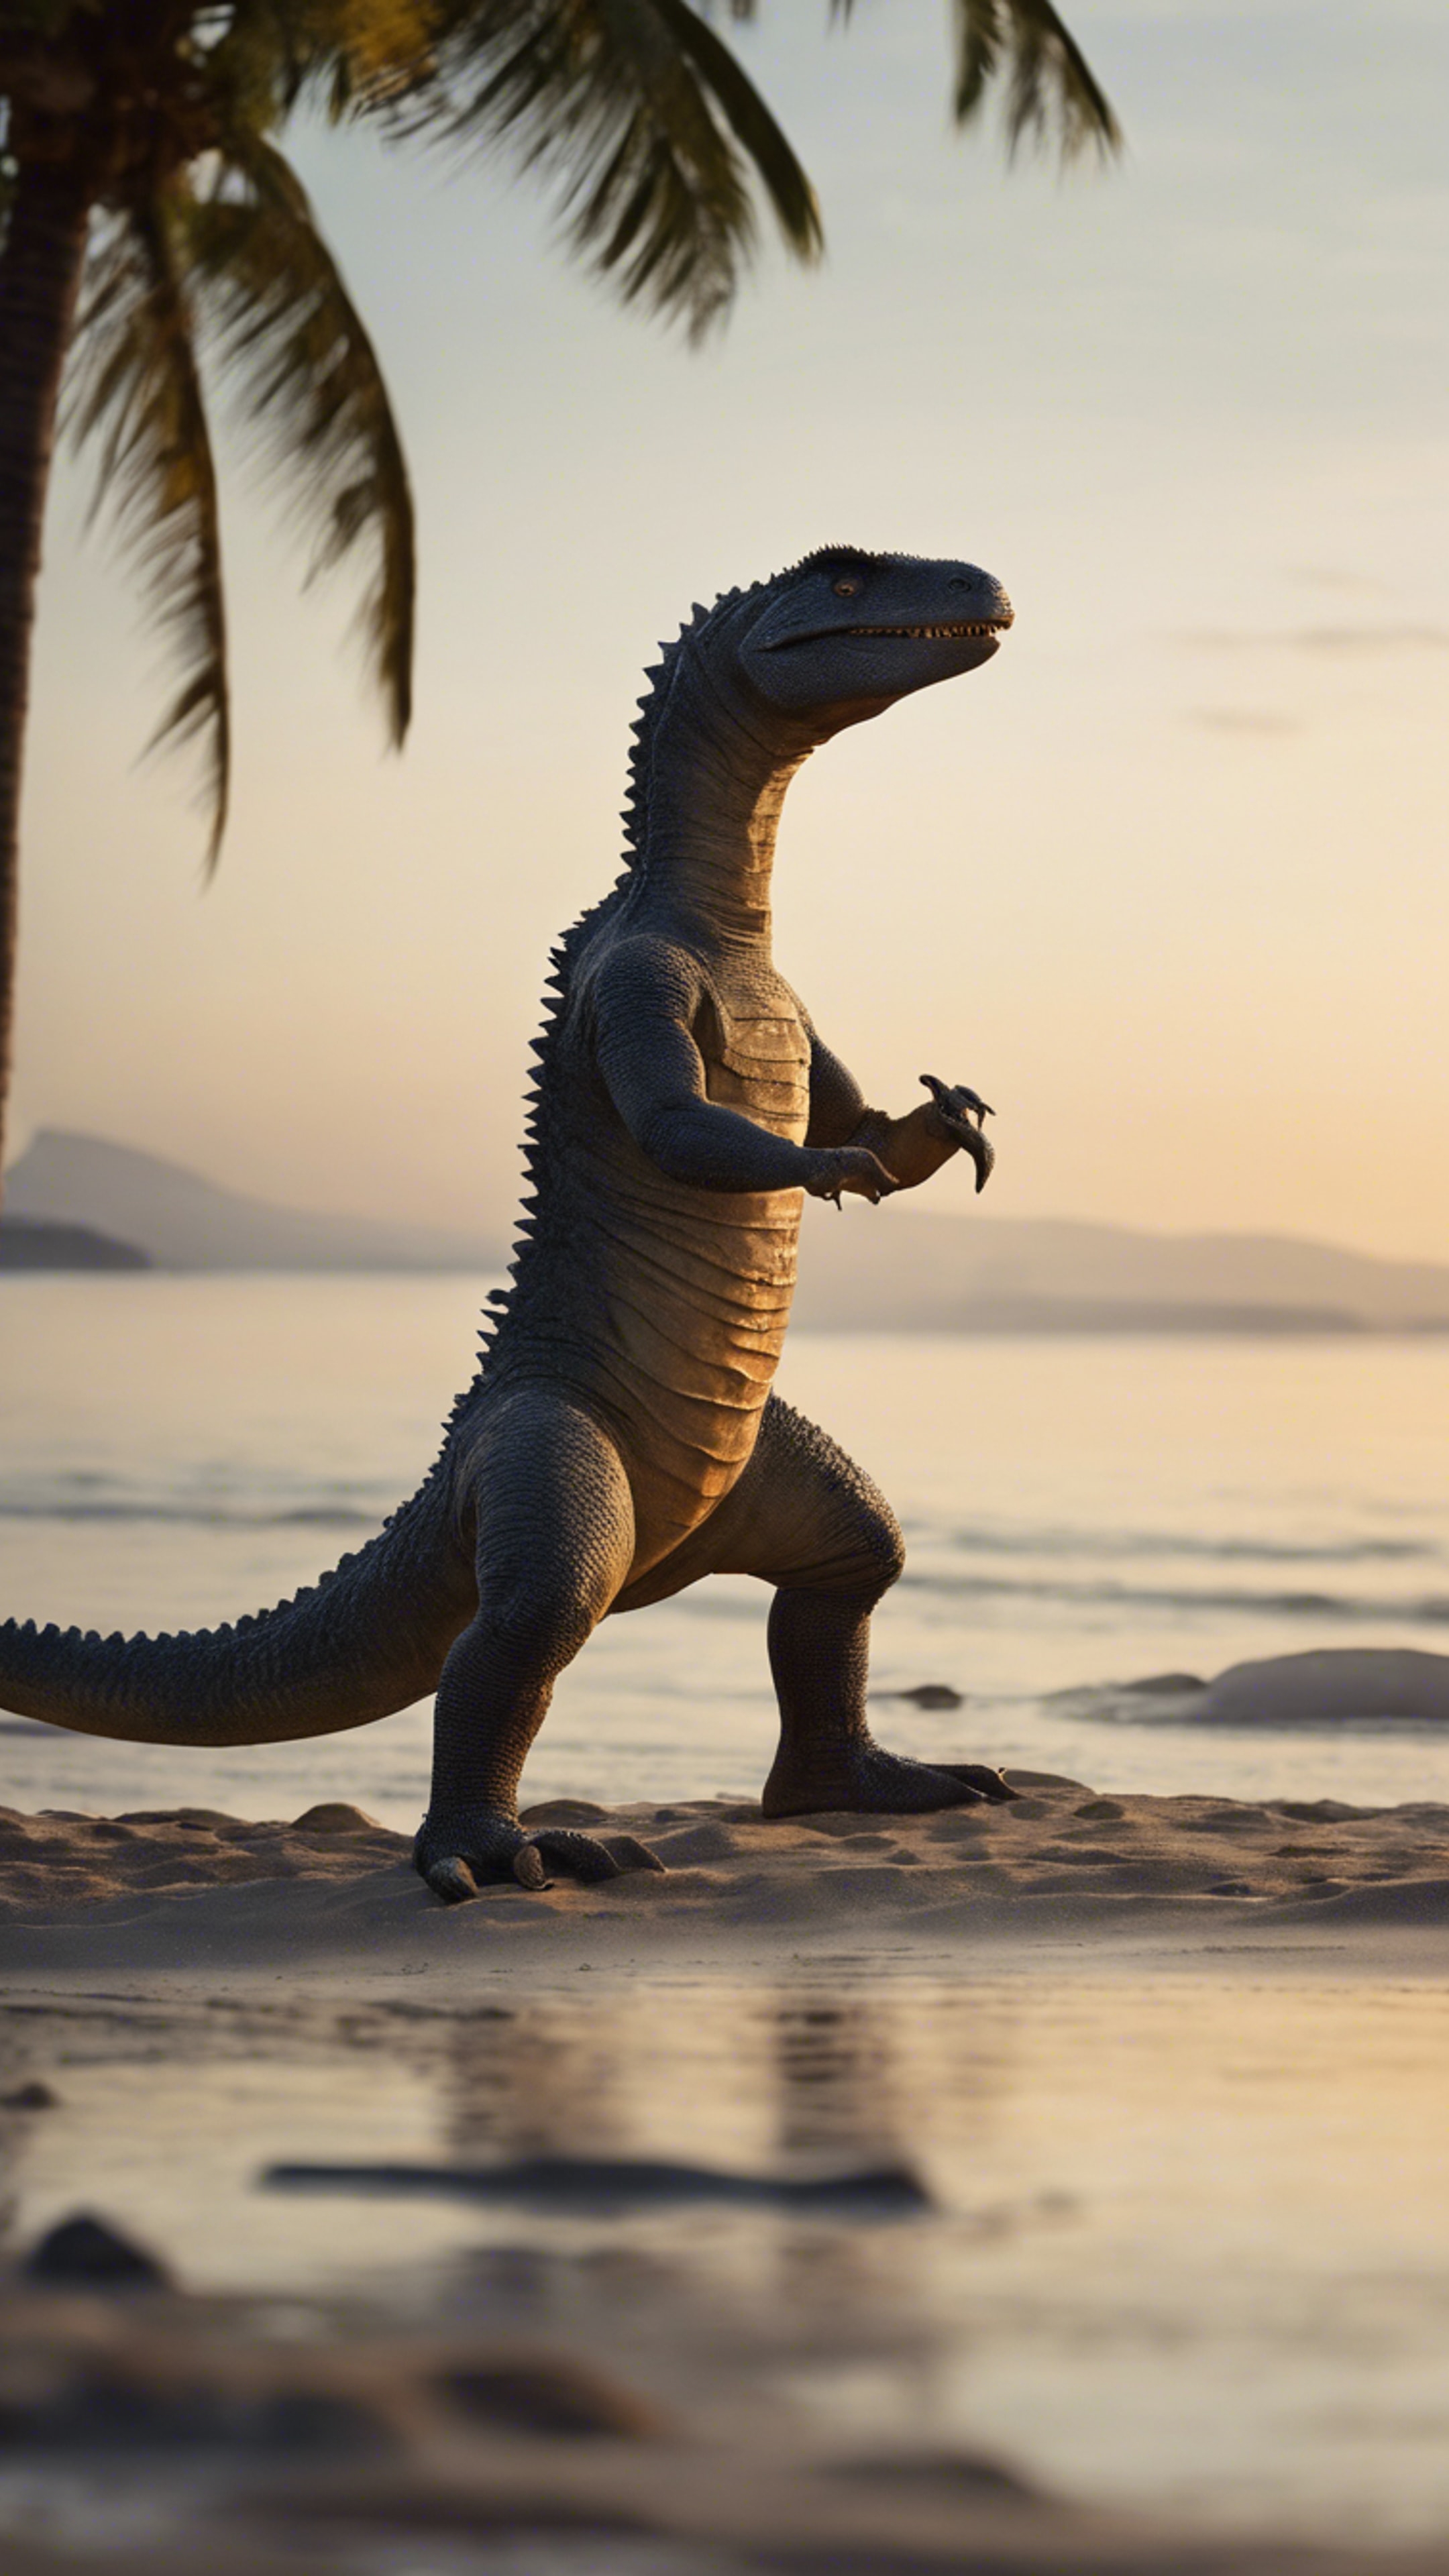 A tranquil scene of Thescelosaurus practicing Tai-Chi during the early dawn on a peaceful beach. Behang[4138bc2c7b604ba6814f]